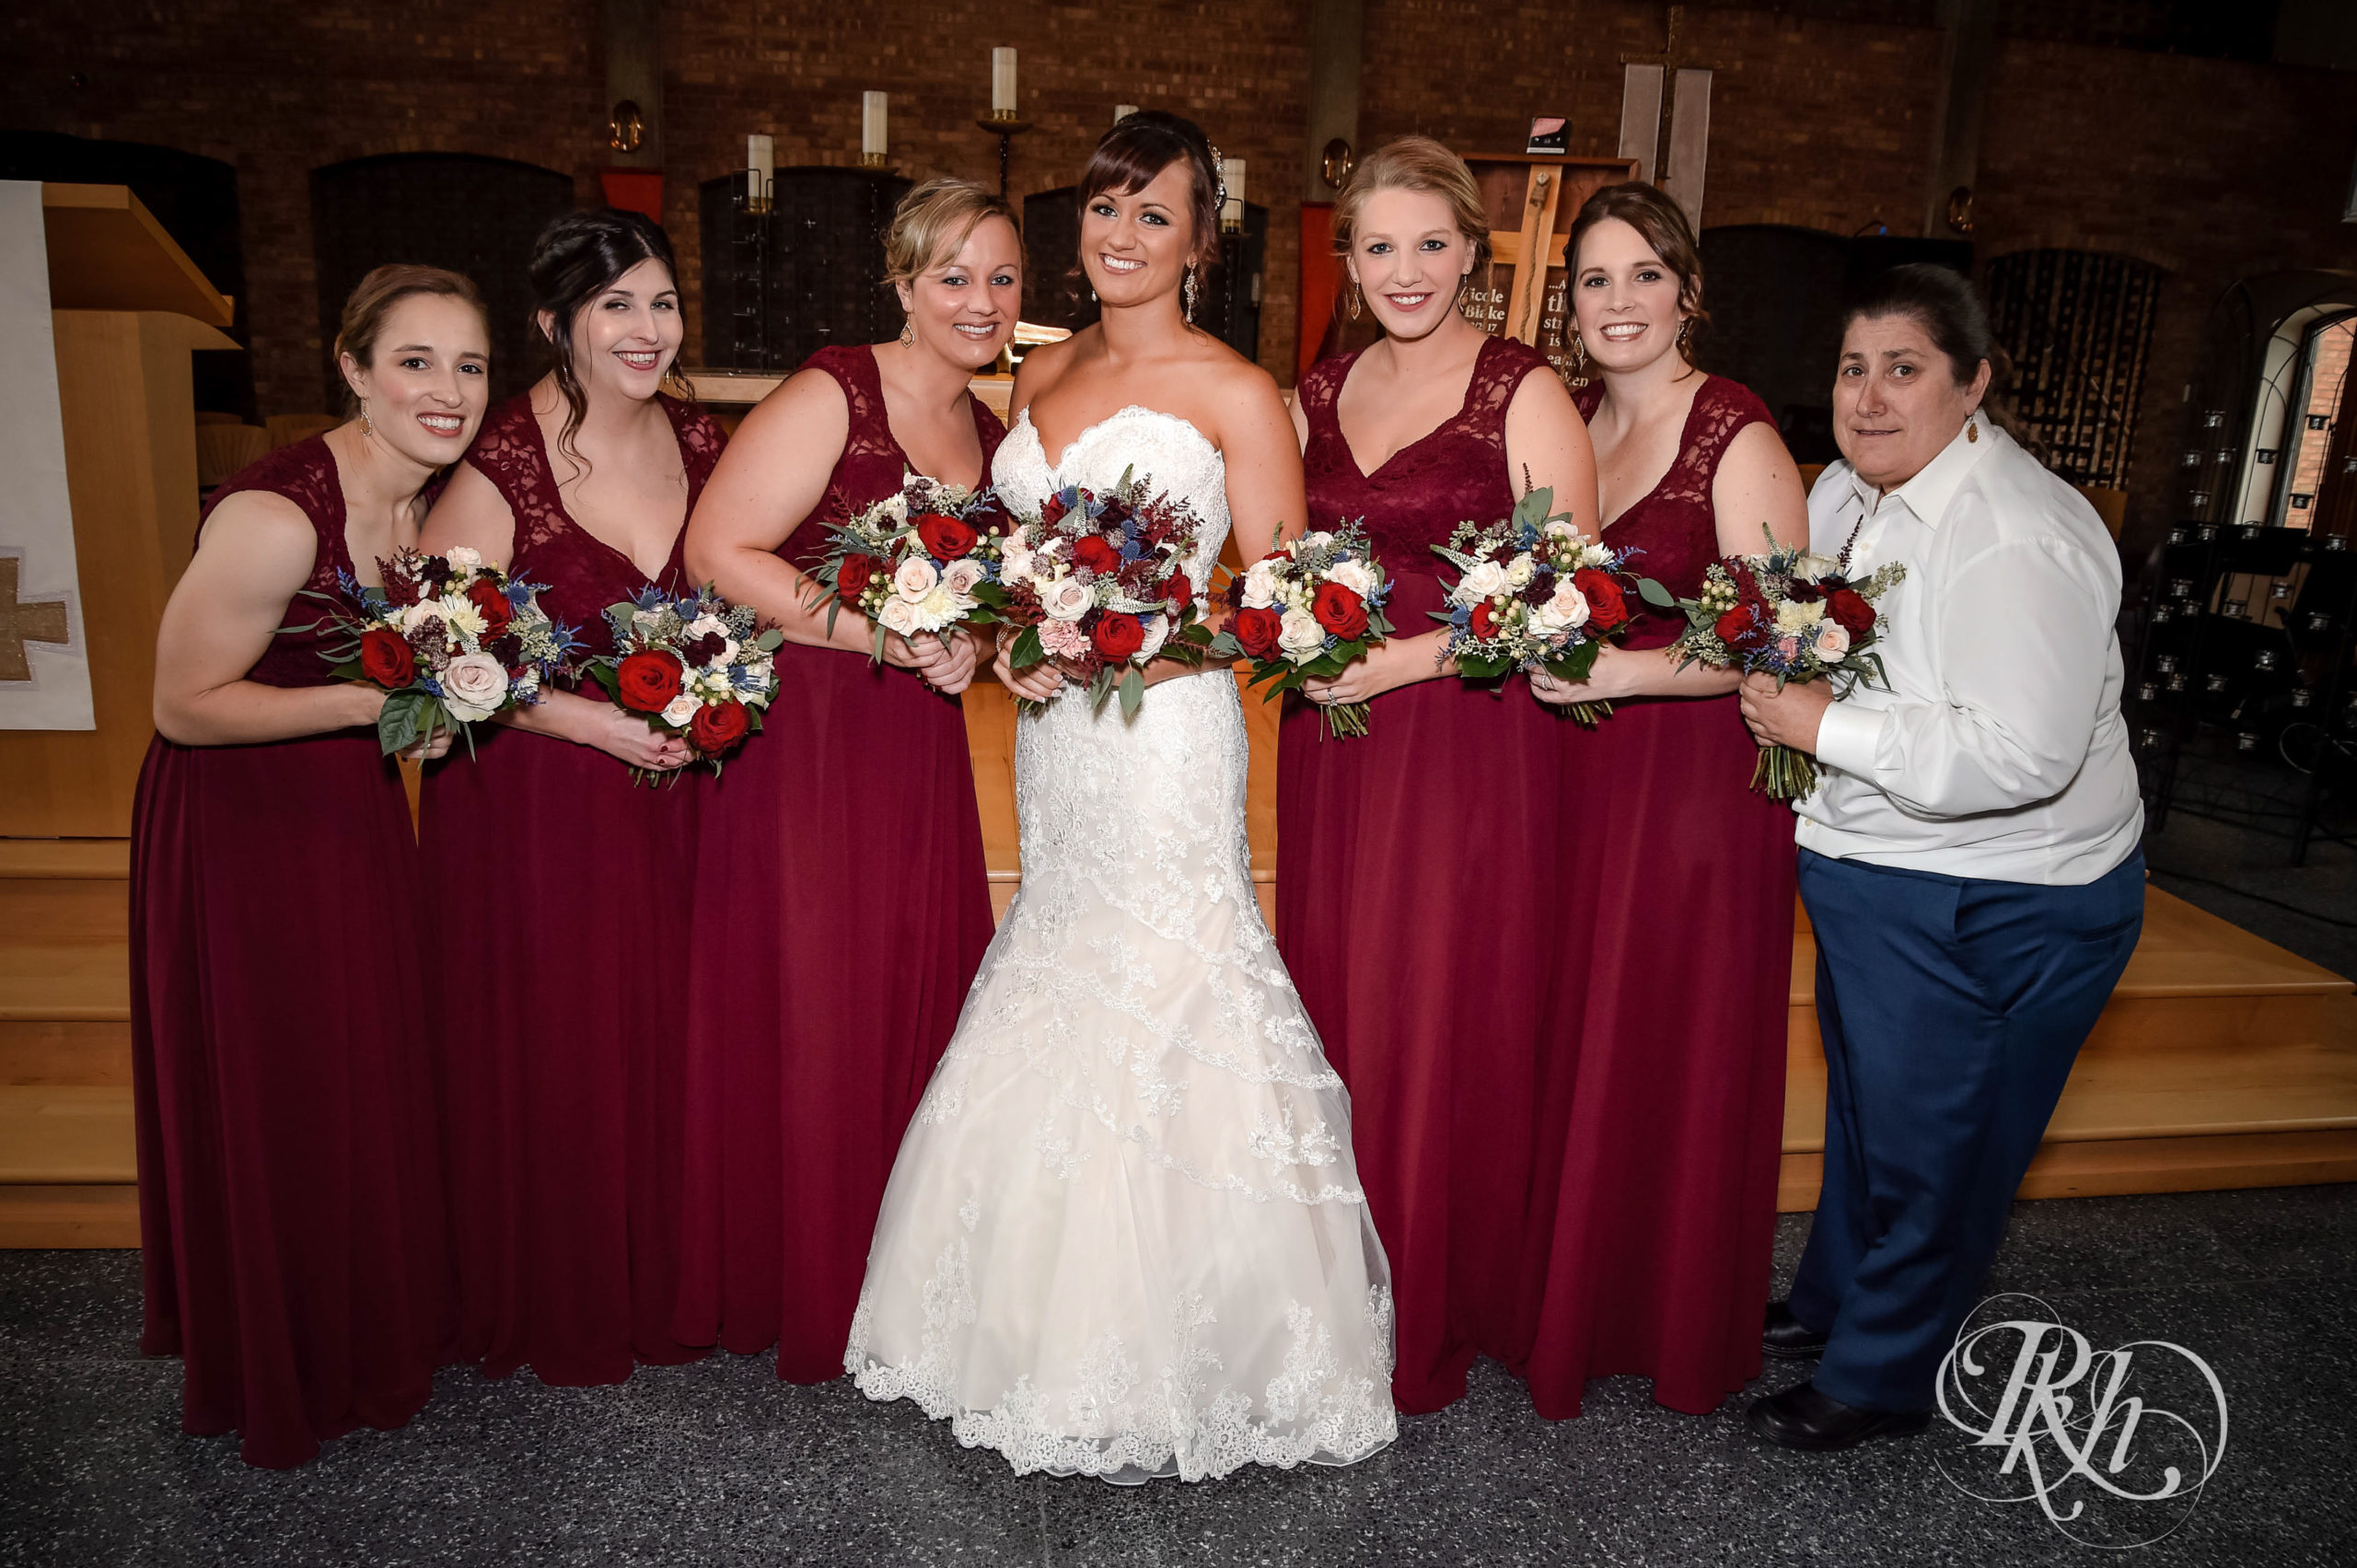 Bride smiles with wedding party in red dresses at church wedding in Minneapolis, Minnesota.